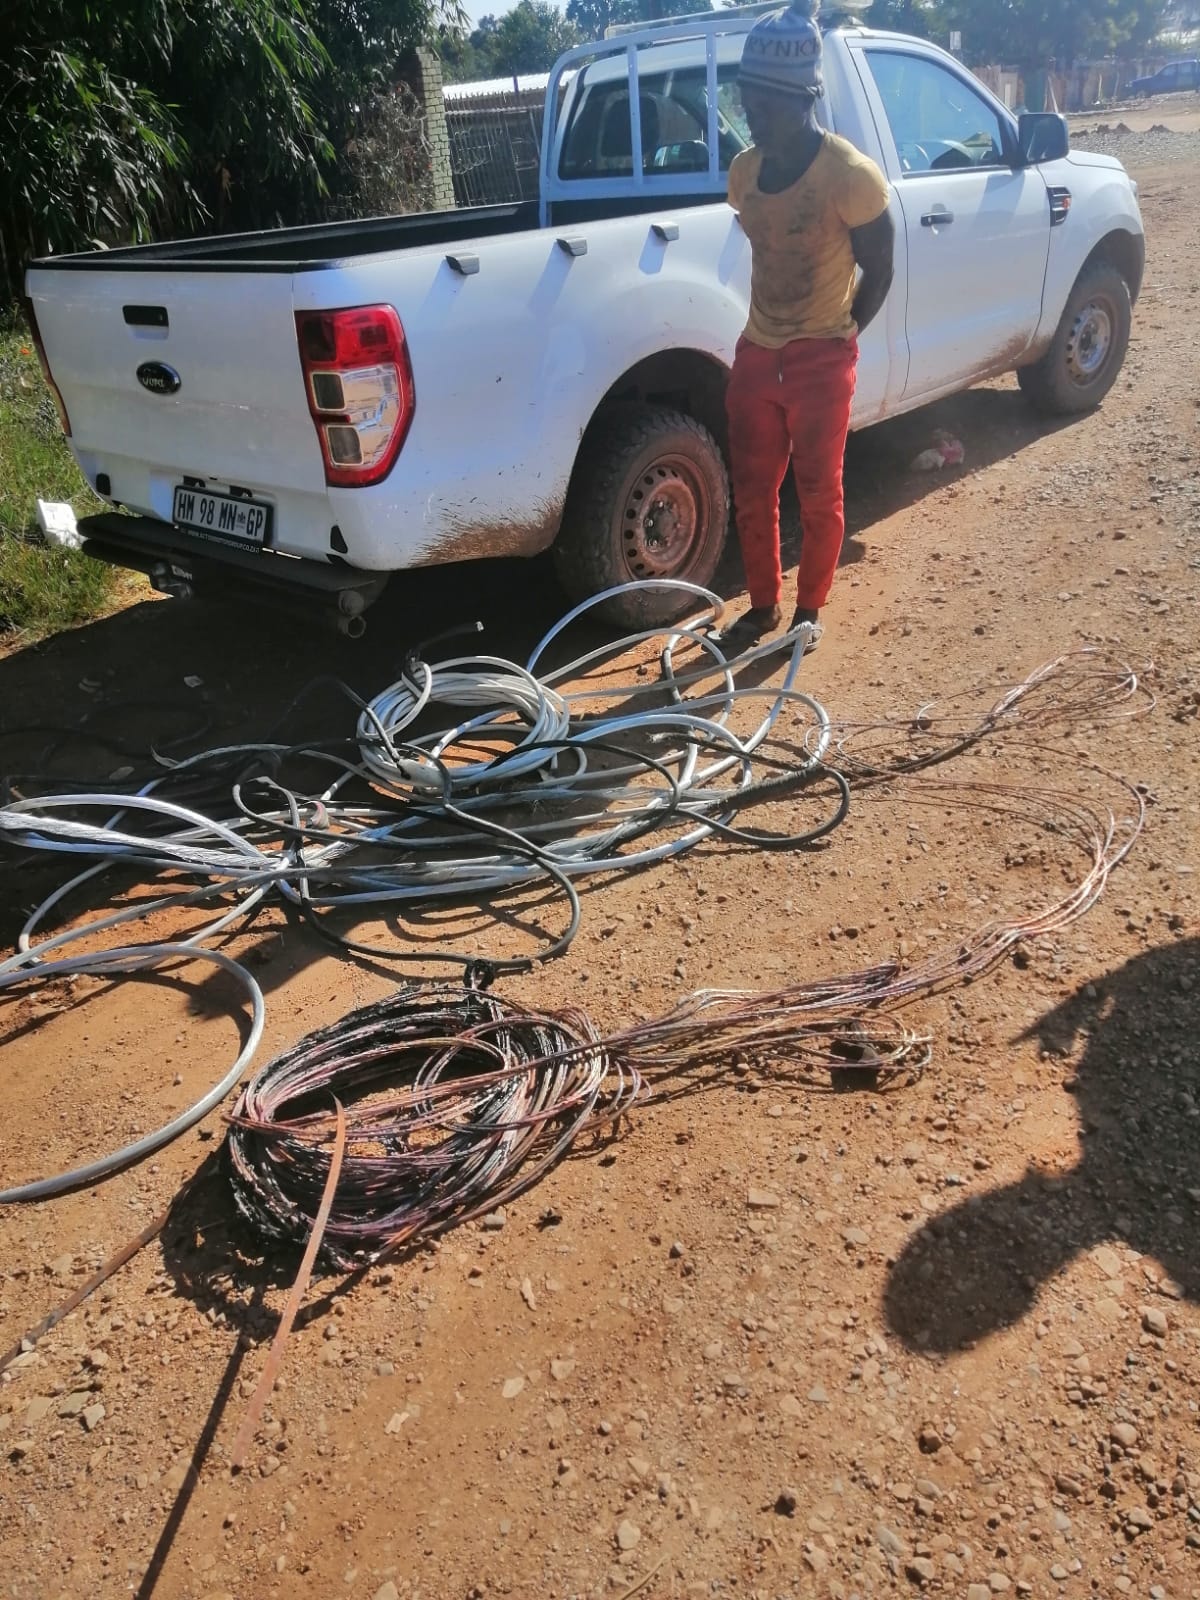 Malawian male found guilty of the theft and posssesion of 80 m of copper cable.